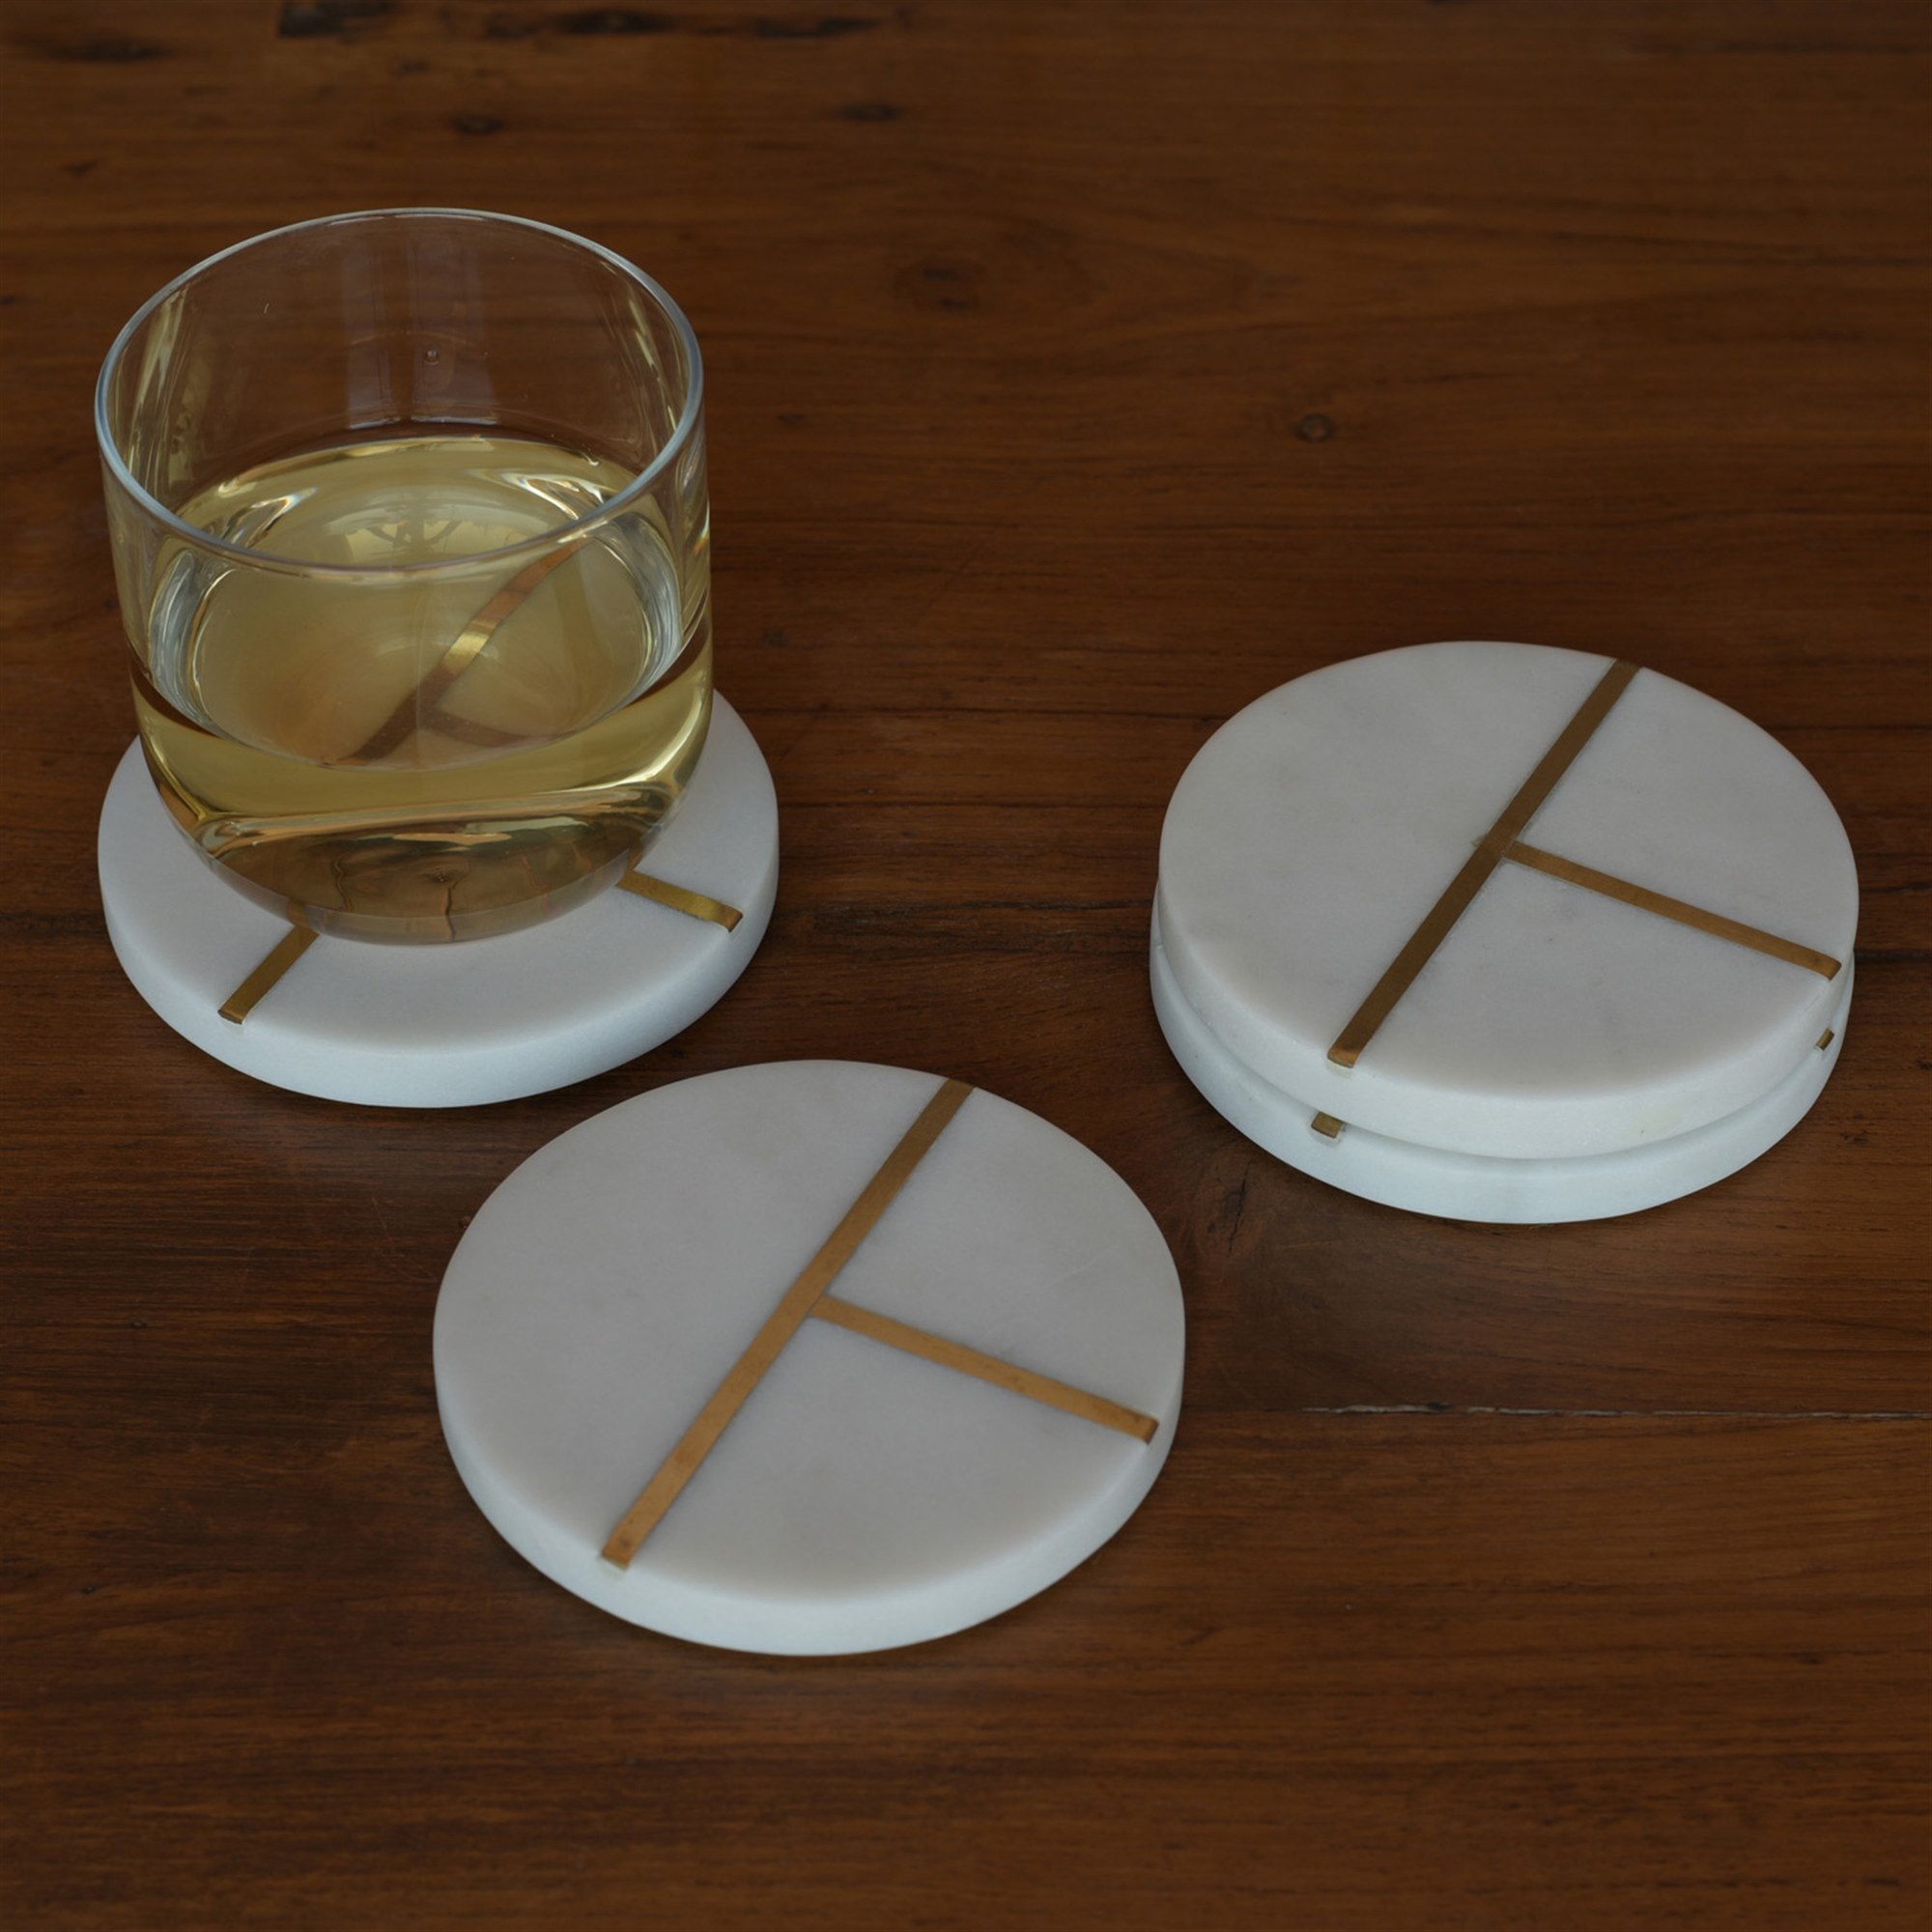 Aperture Marble and Brass Round Coasters Set of 4 by HomArt - Seven Colonial